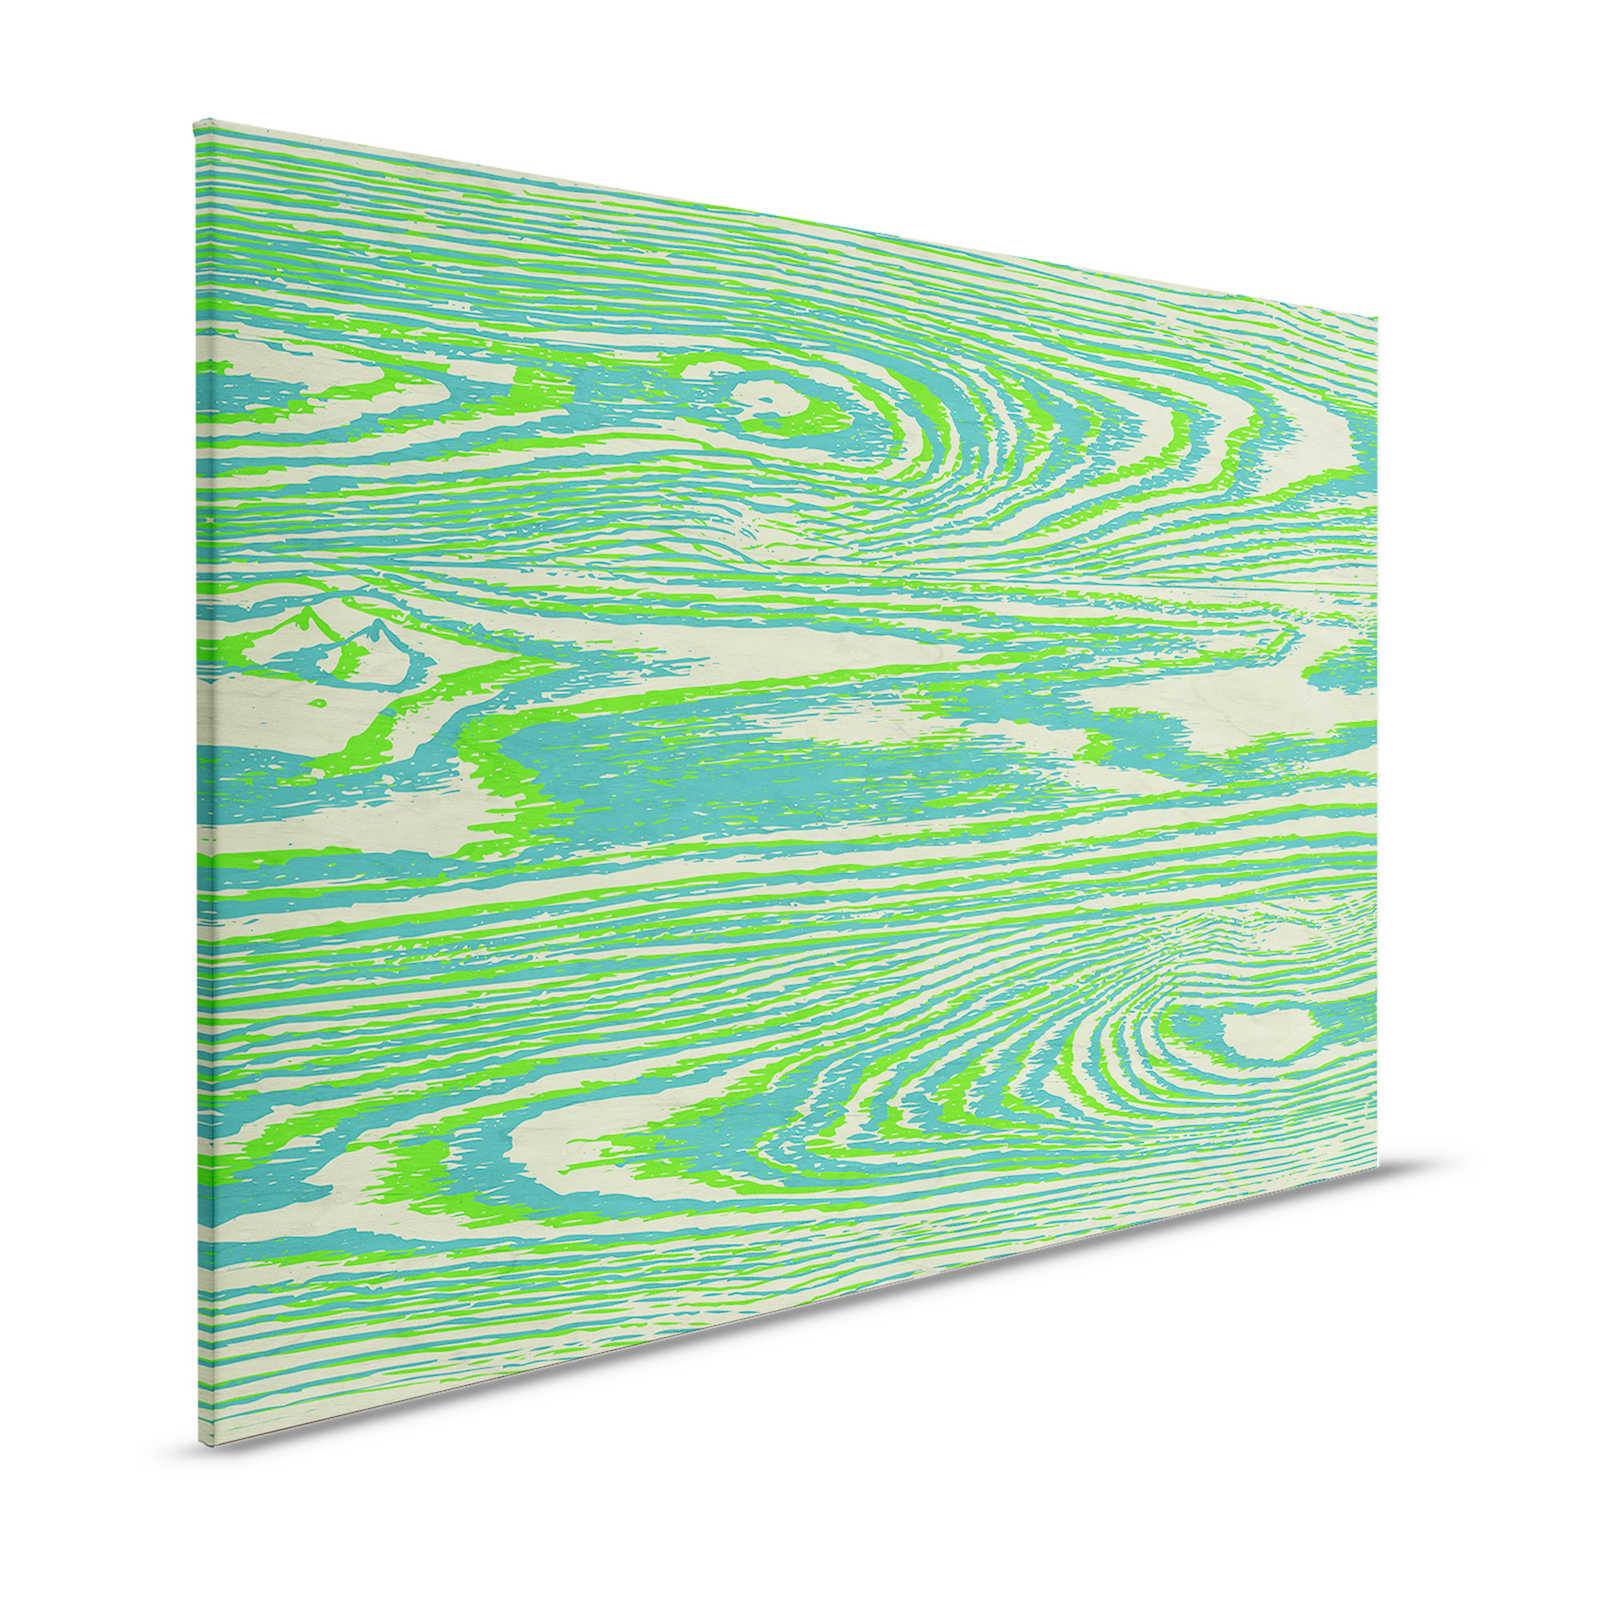 Bounty 1 - Neon Green Canvas Painting Wood Look Design - 1.20 m x 0.80 m
